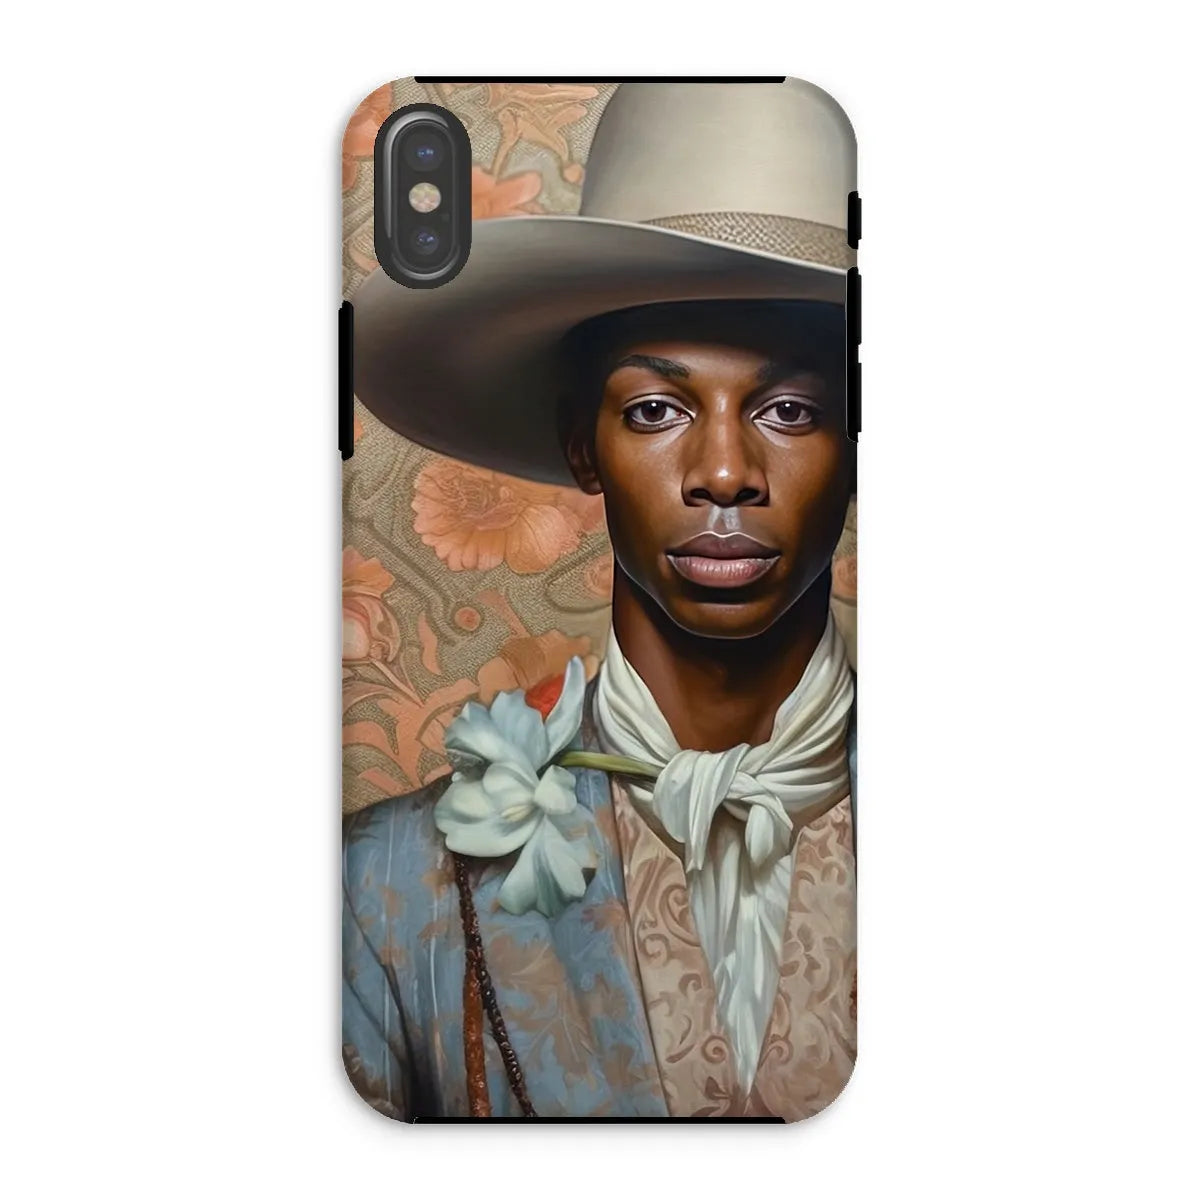 Apollo The Gay Cowboy - Gay Aesthetic Art Phone Case - Iphone Xs / Matte - Mobile Phone Cases - Aesthetic Art